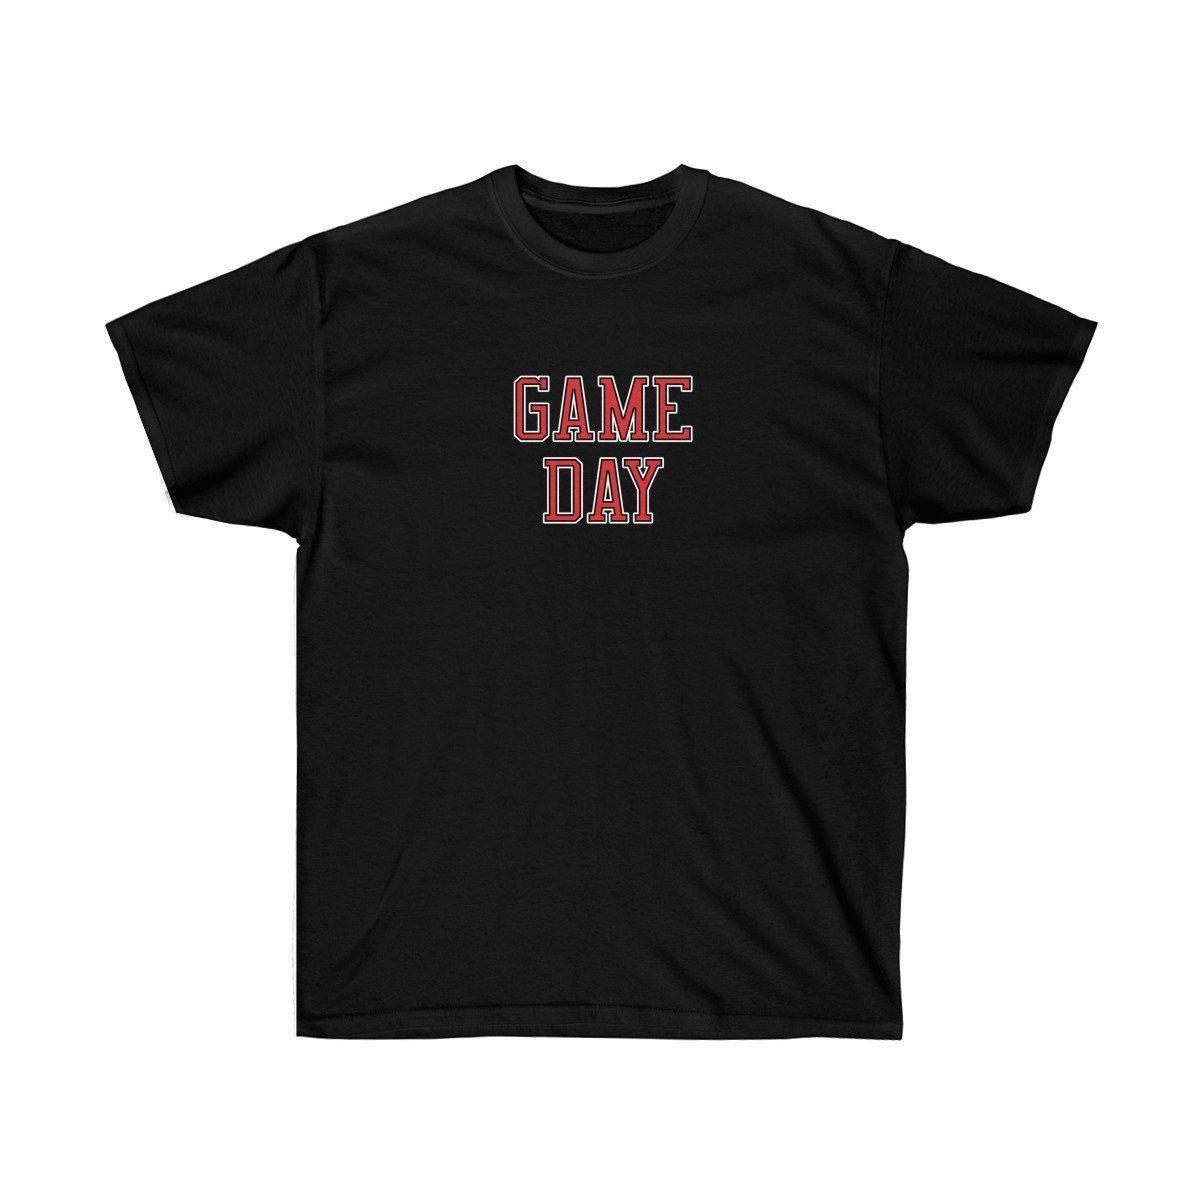 Game Day Tee - Sports T-shirt for Football, Basket, Soccer games-Black-L-Archethype